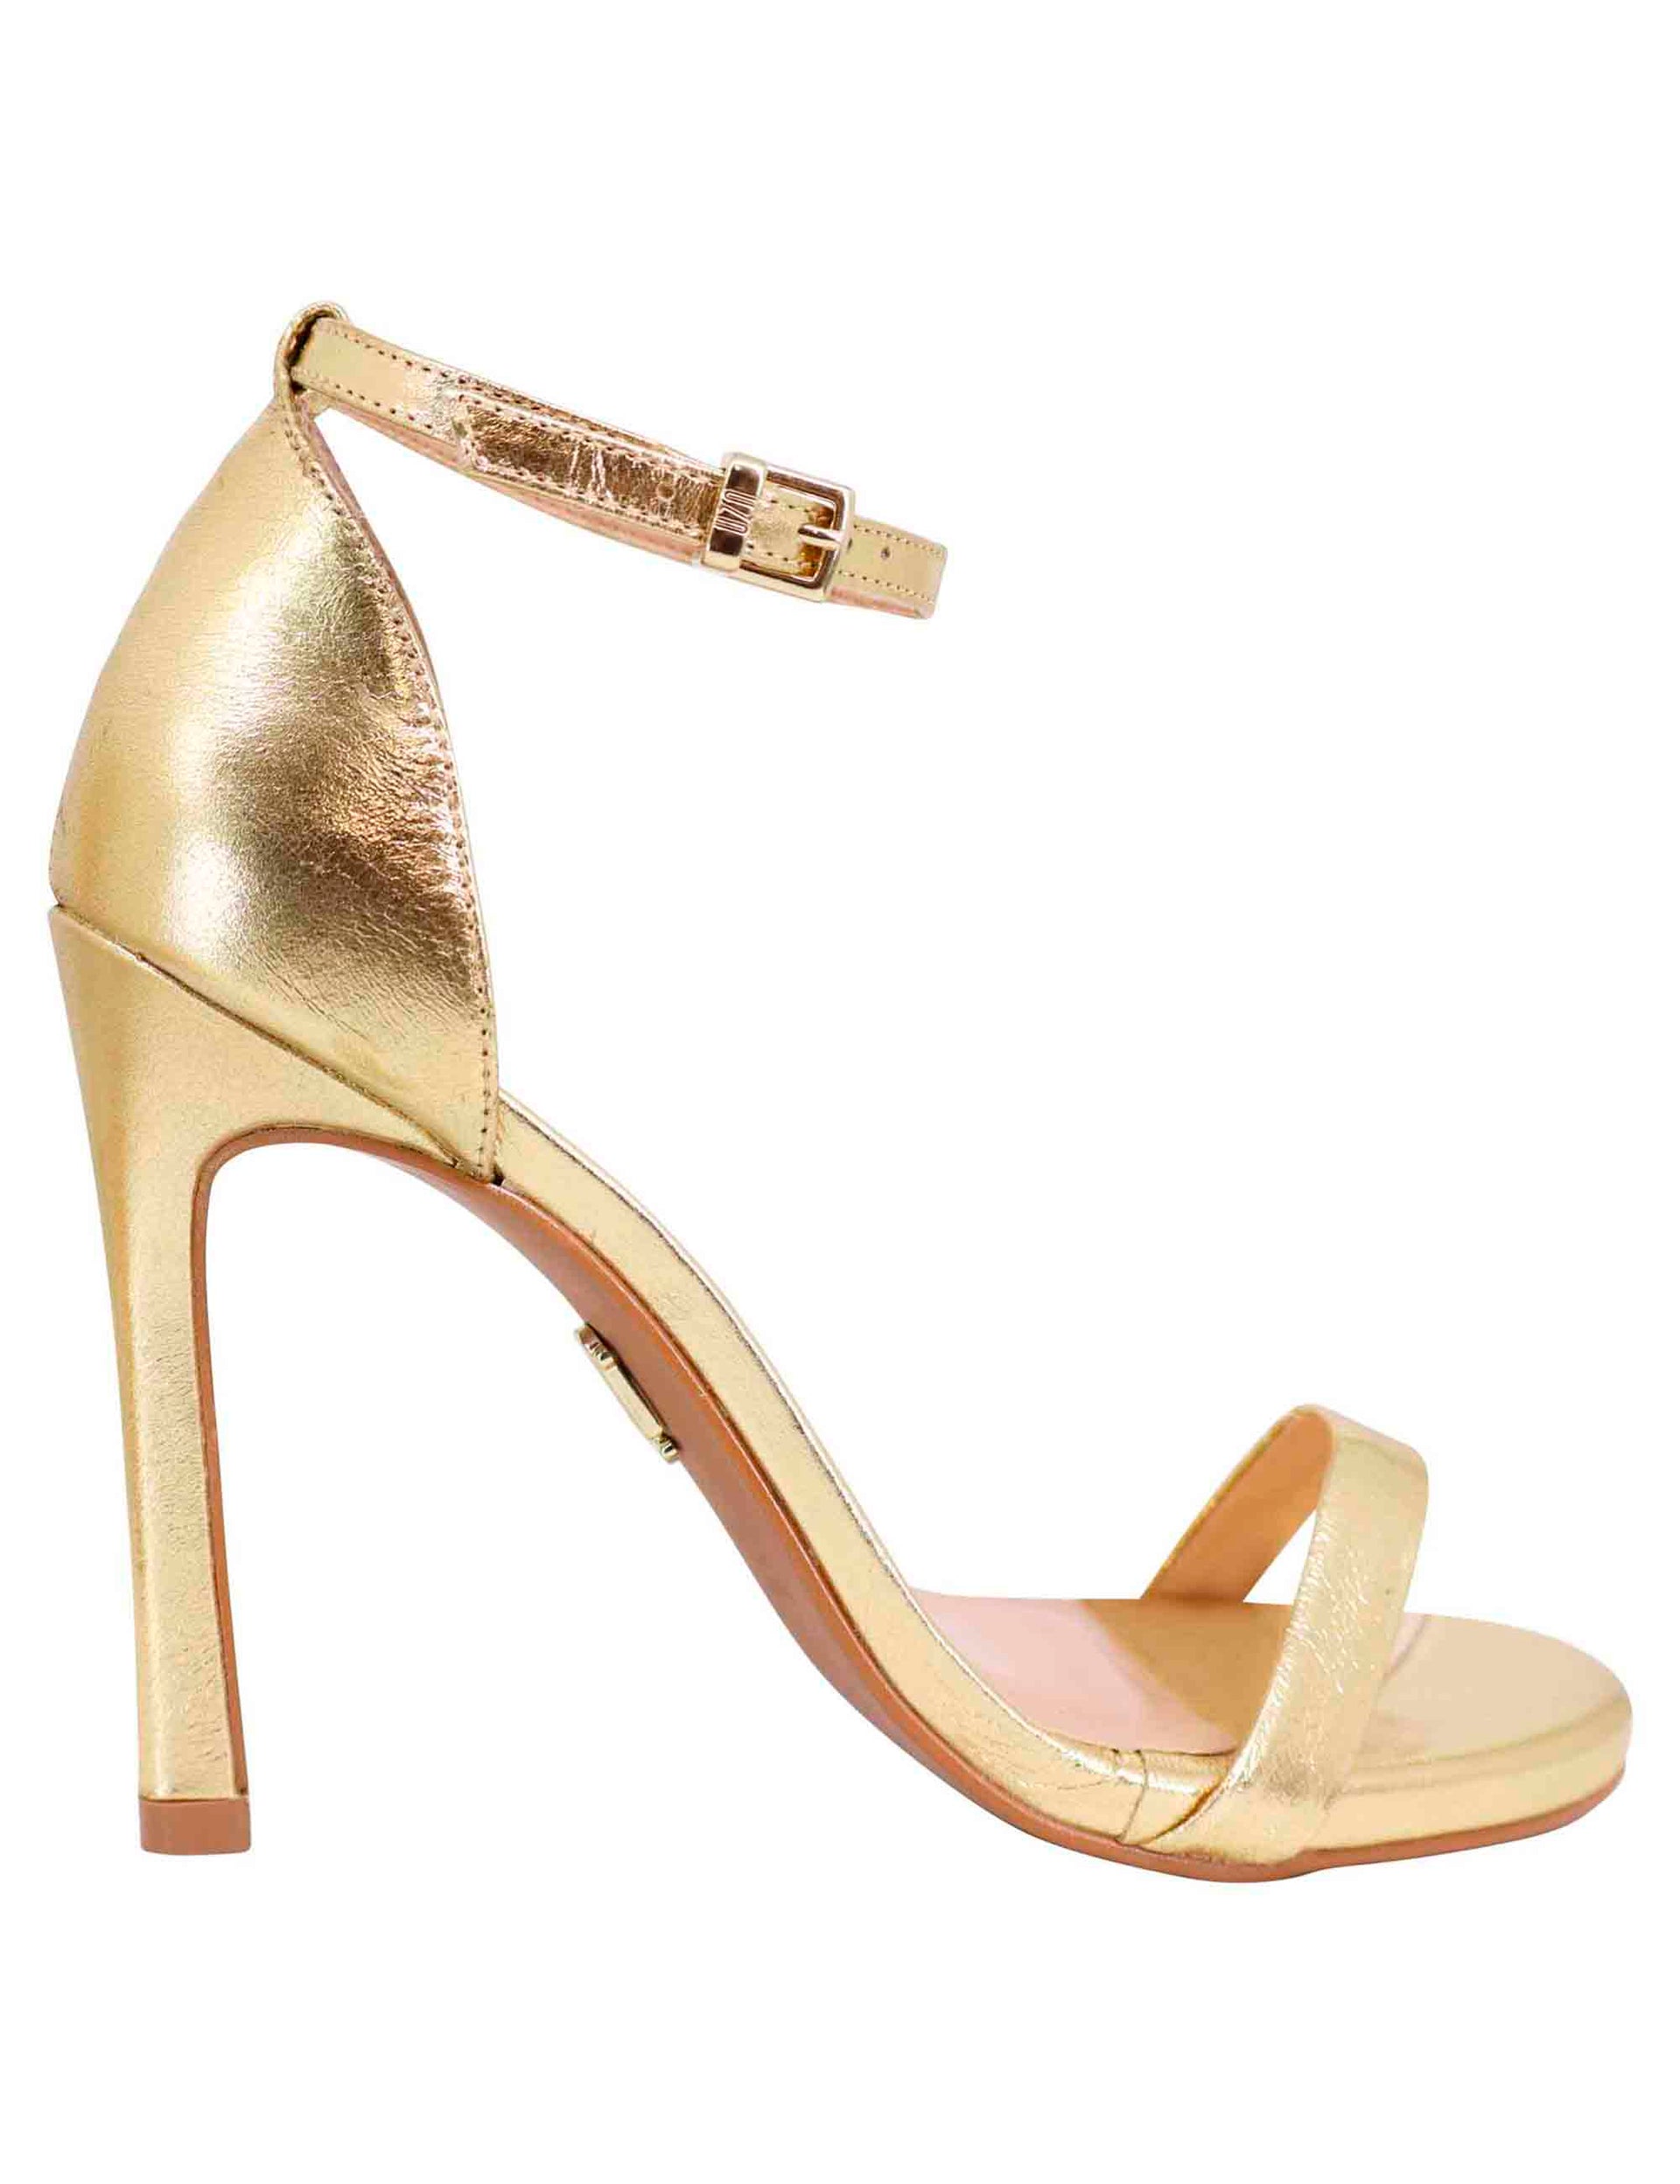 Women's sandals in gold leather with high heel and ankle strap